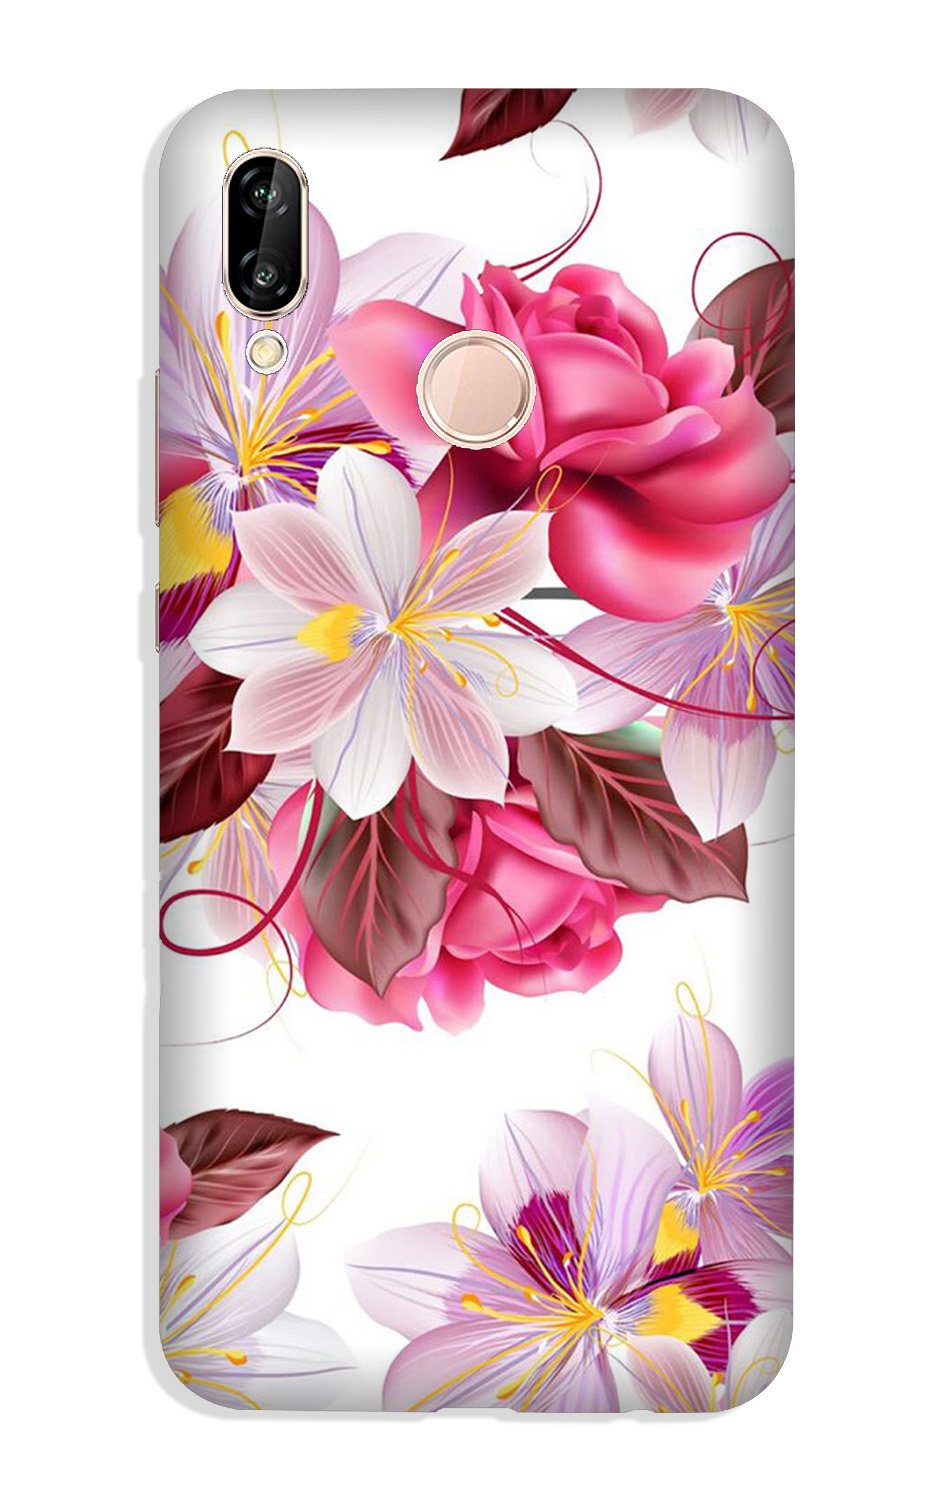 Beautiful flowers Case for Vivo V9/ Y85